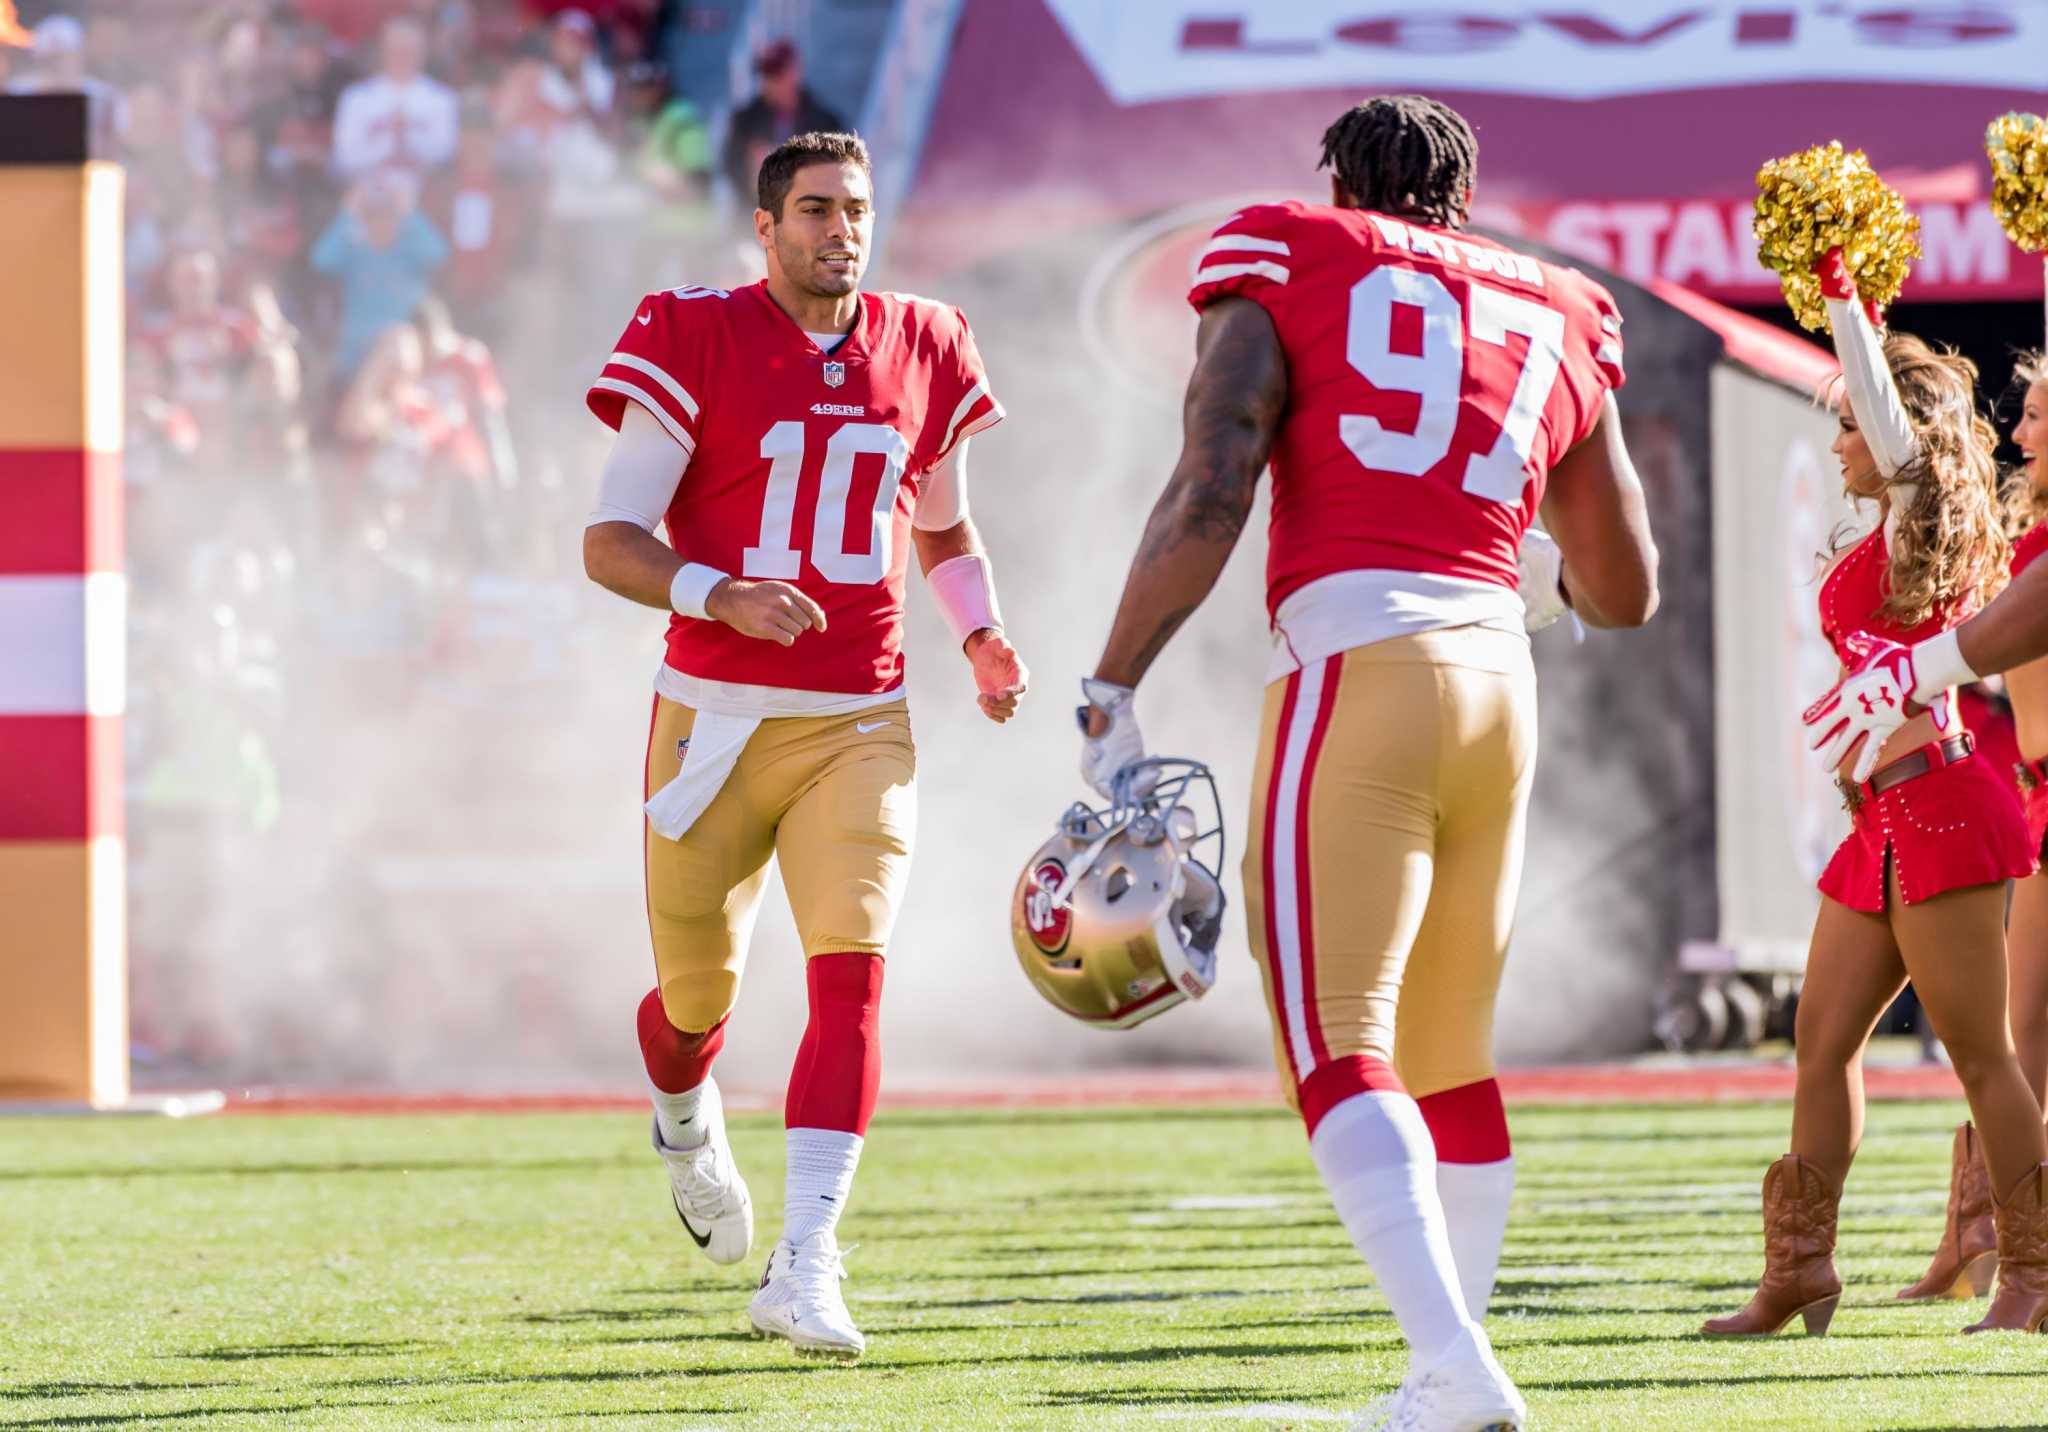 It's 49ers' Garoppolo vs. Titans four years after upset that started a craze